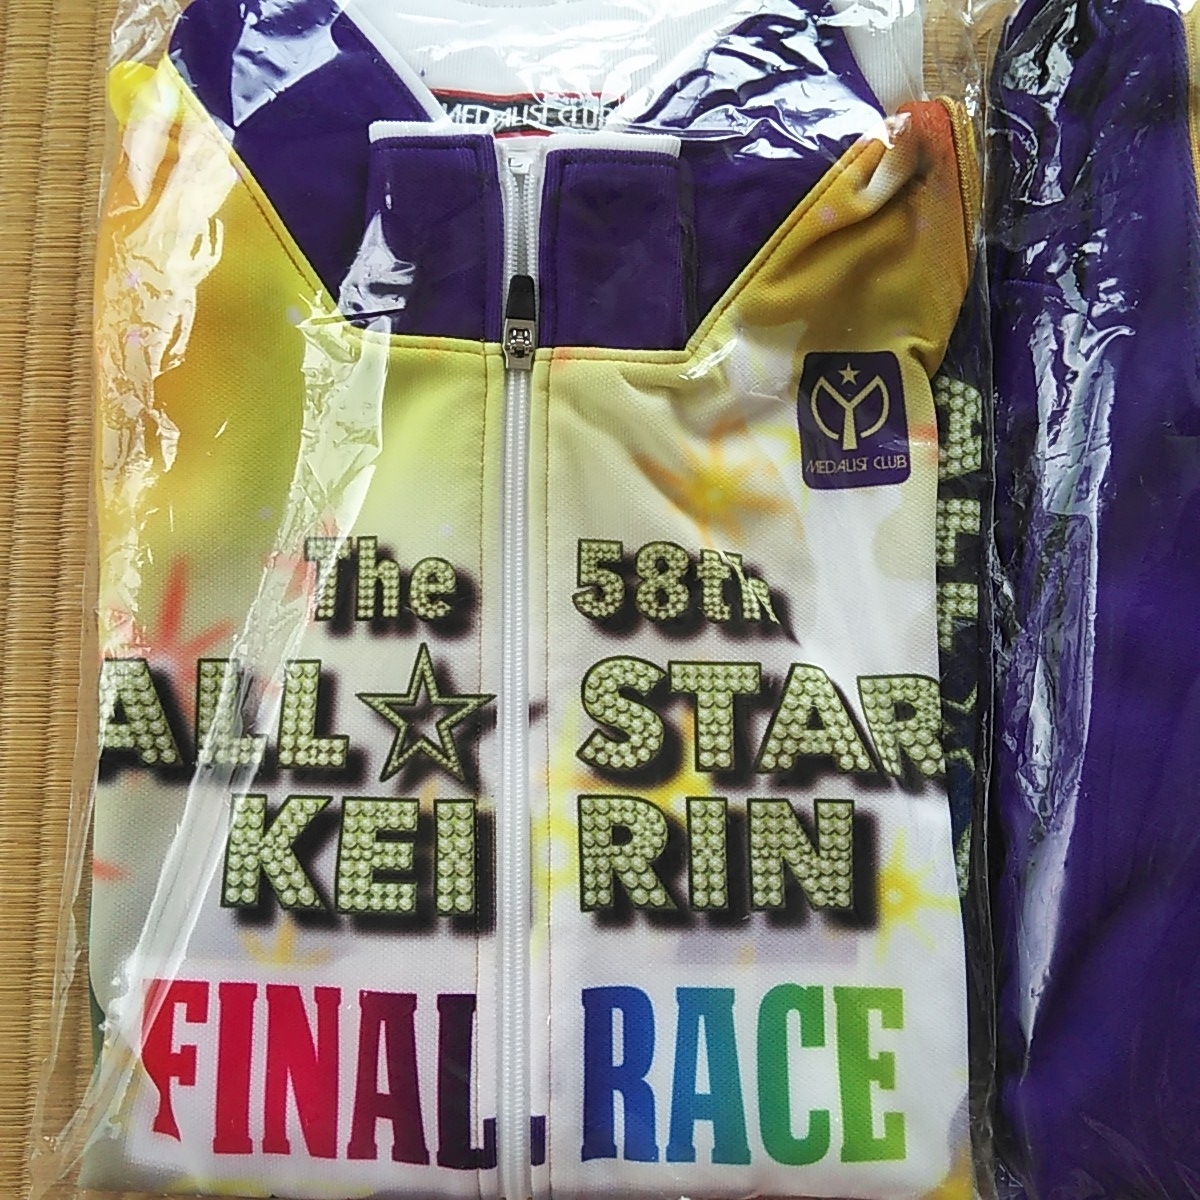  pine door all Star bicycle race jersey top and bottom set not for sale L size 